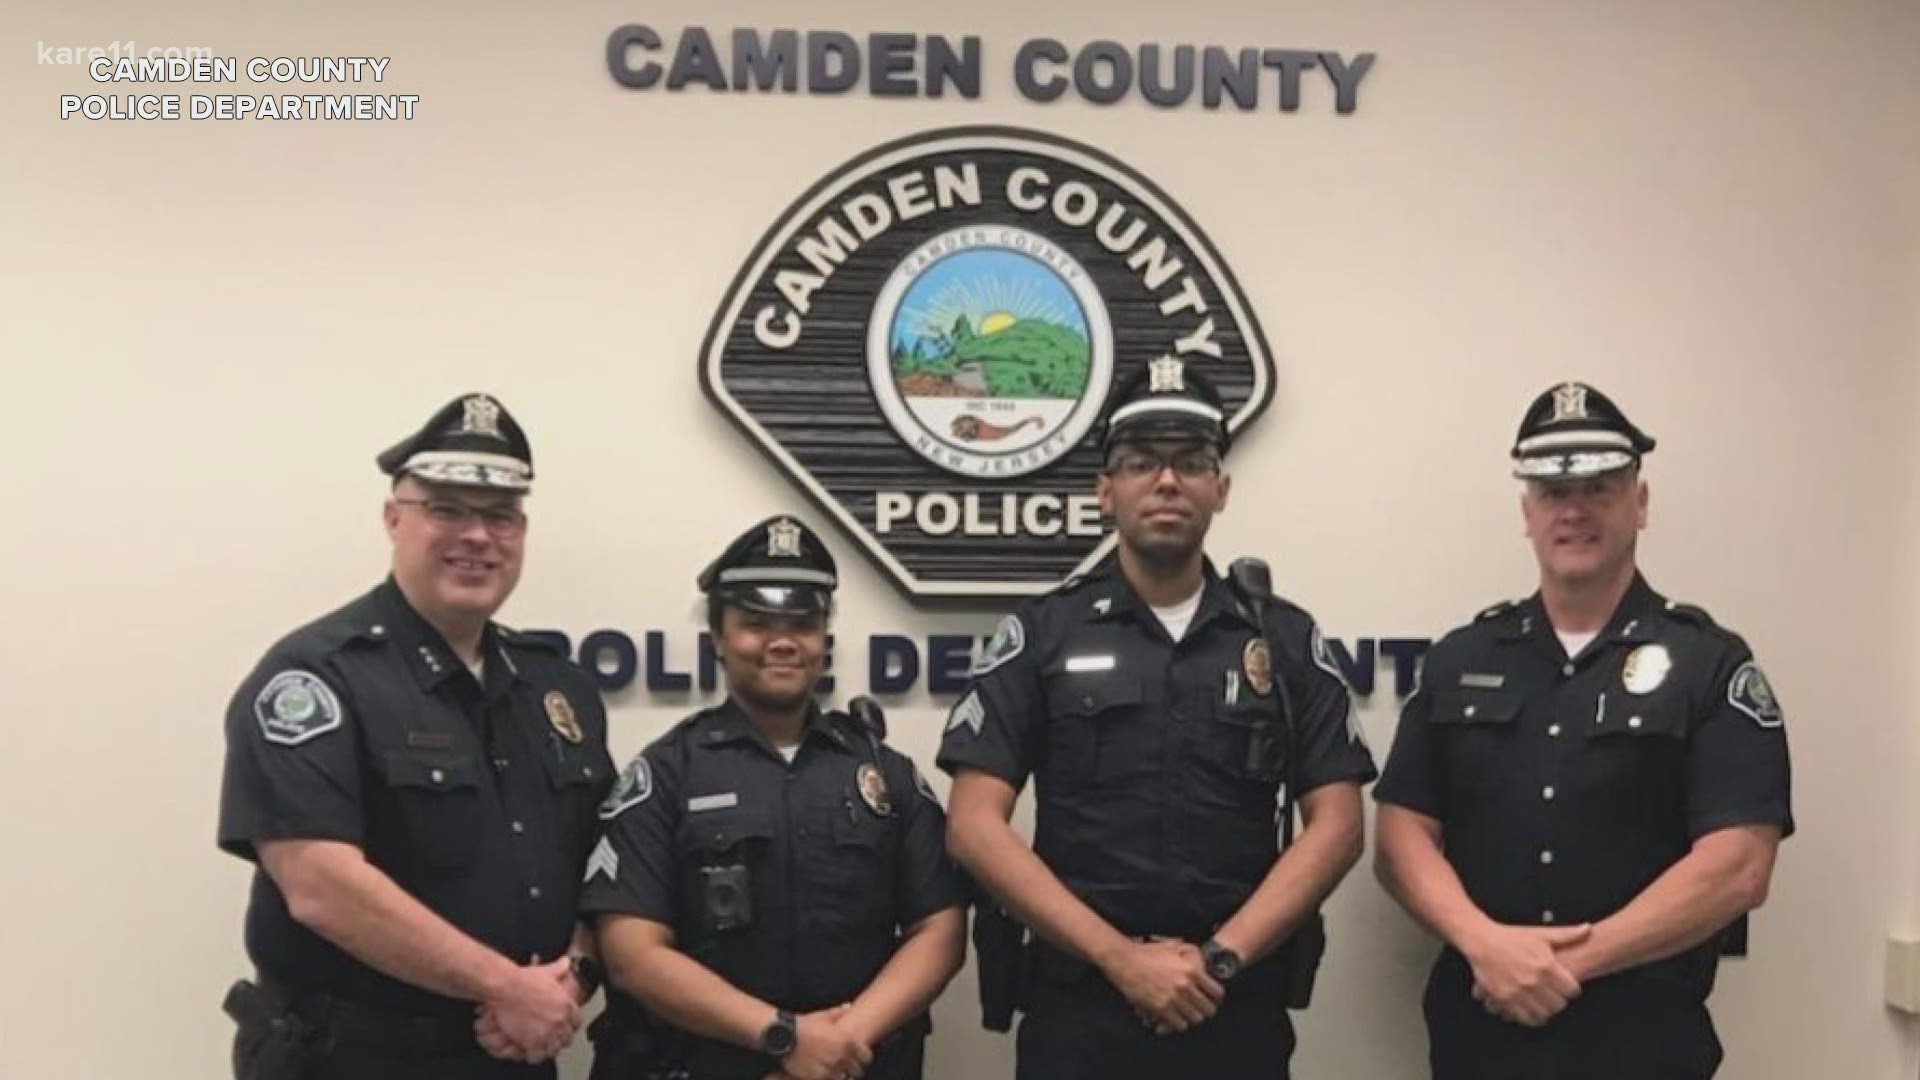 Since 2013, the Camden County Police Department has seen an 85% drop in excessive force complaints.